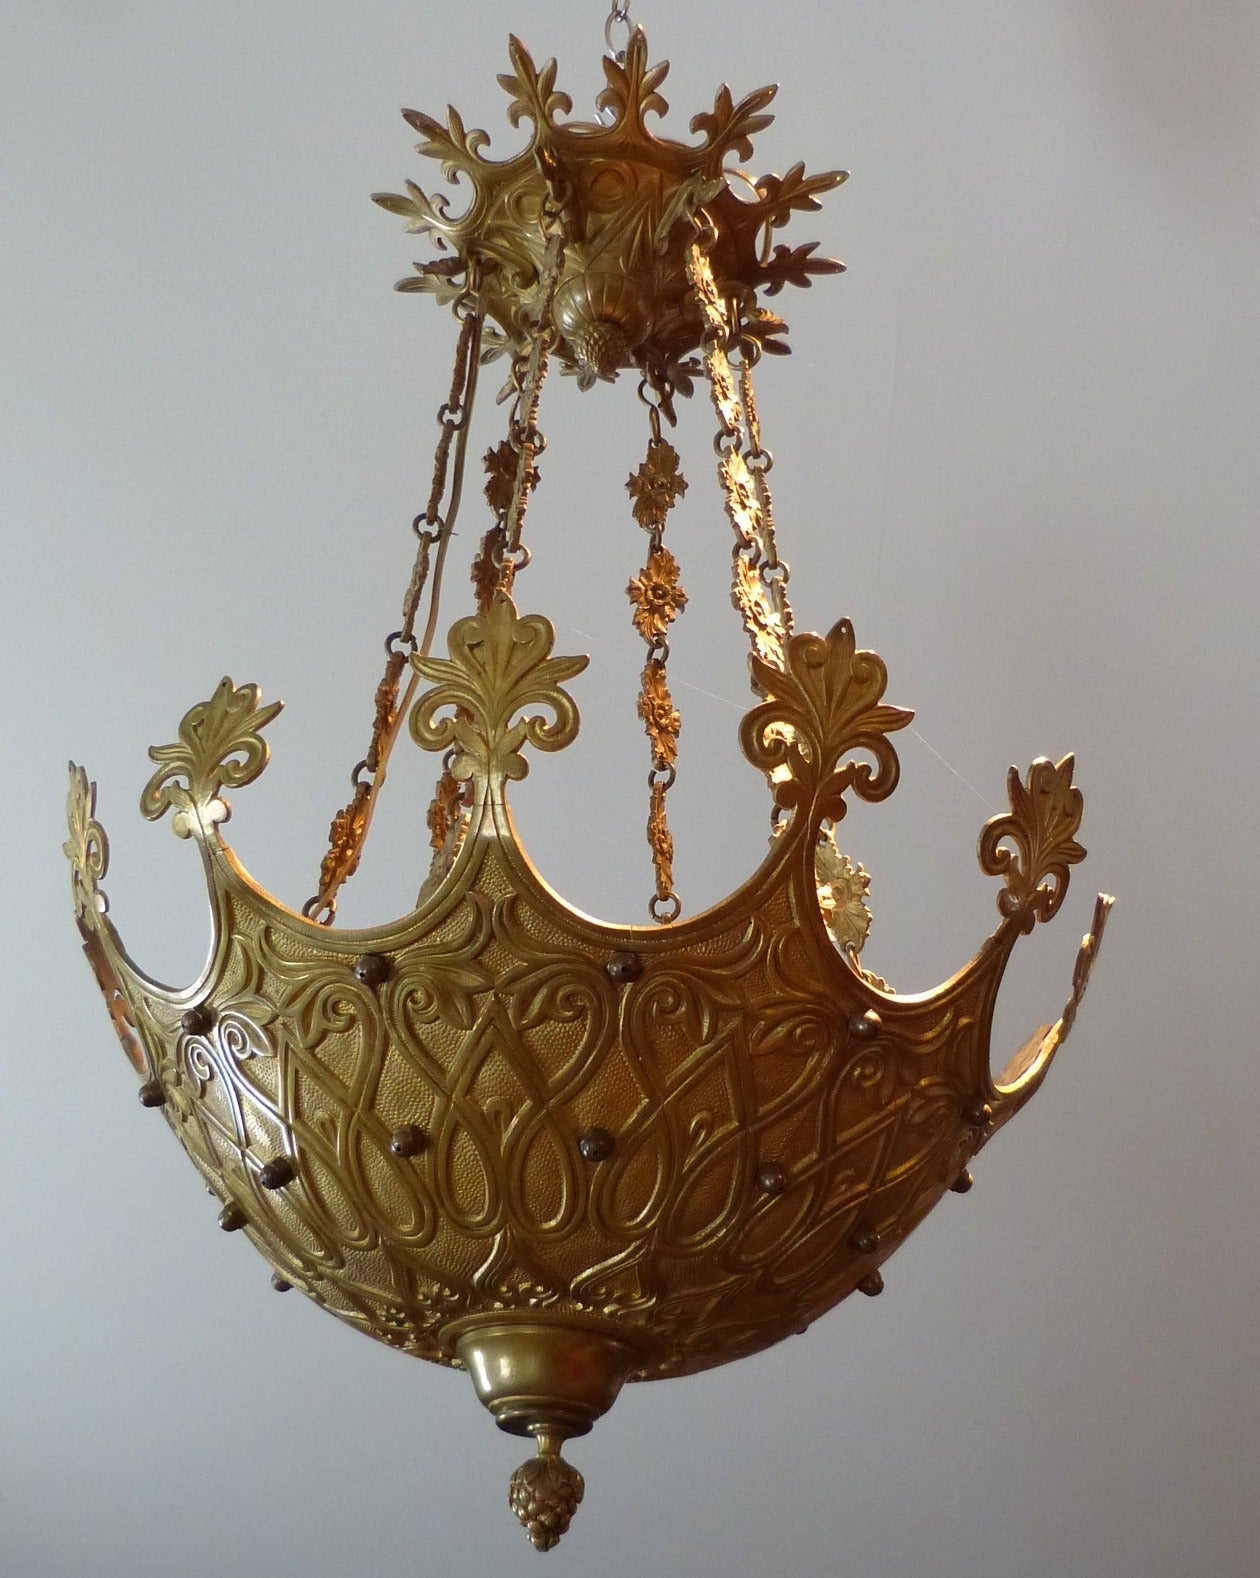 An unusual French late 19th century gilt bronze chandelier, probably for the Turkish market, now electrified. The style seems influenced by William Morris.